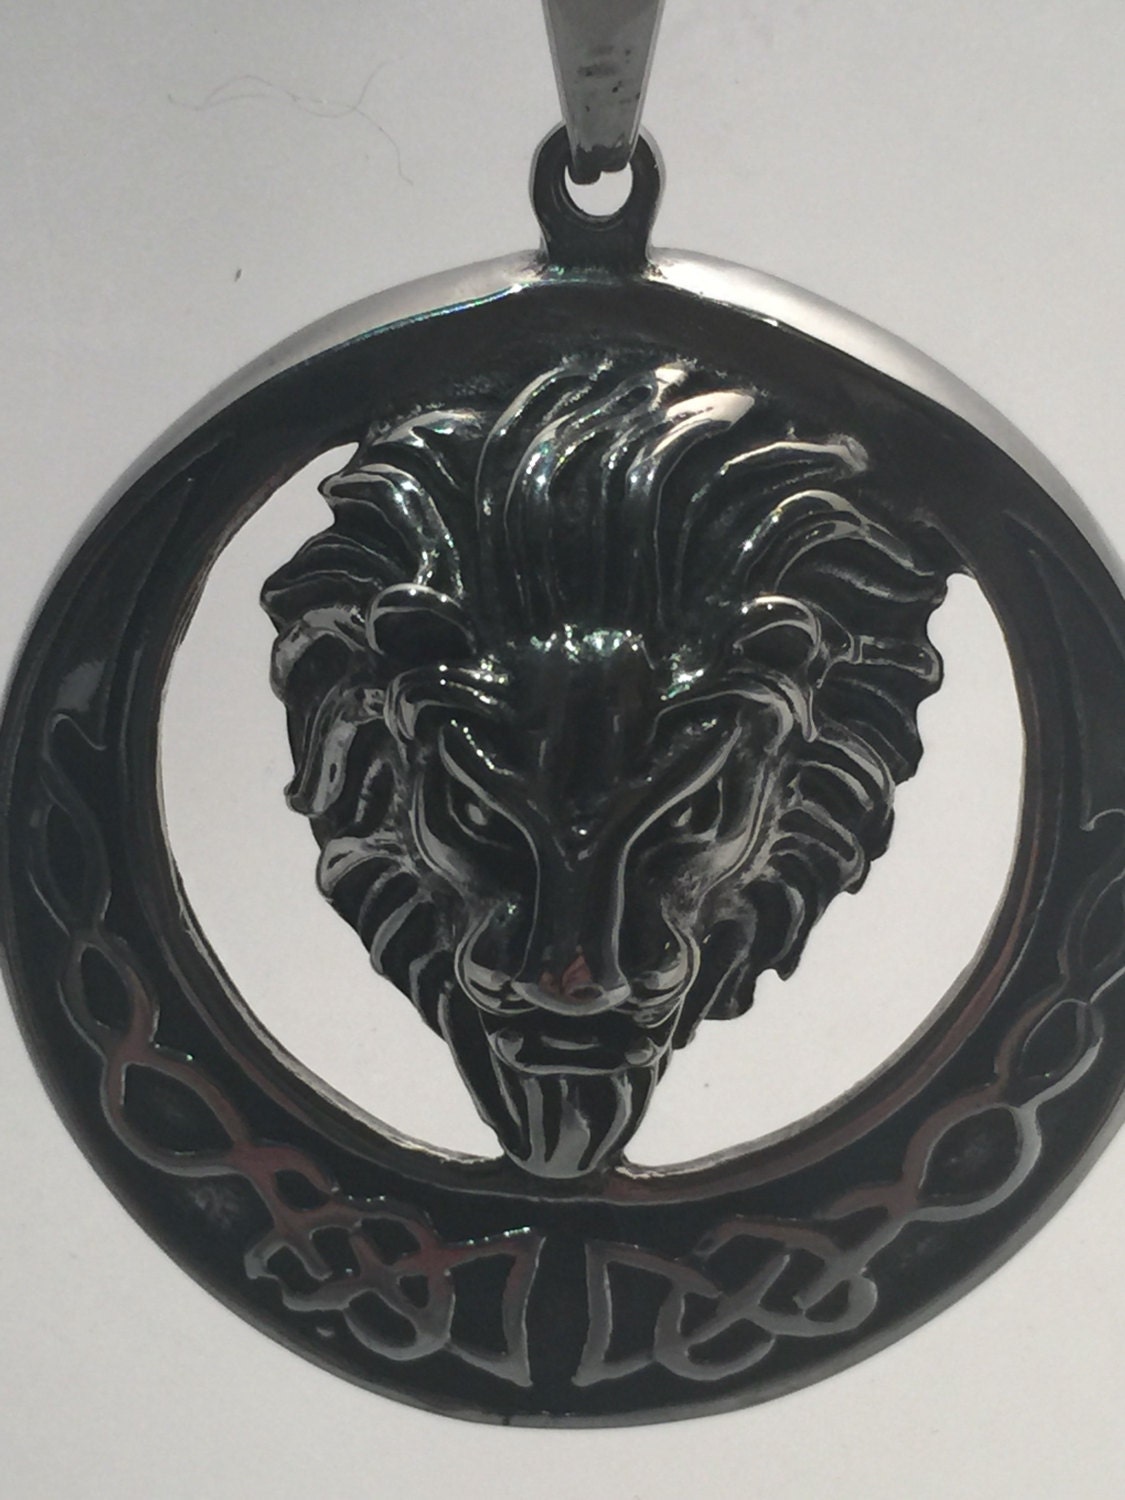 Vintage Handmade Silver Stainless Steel Gothic Celtic Lion Pendant Necklace